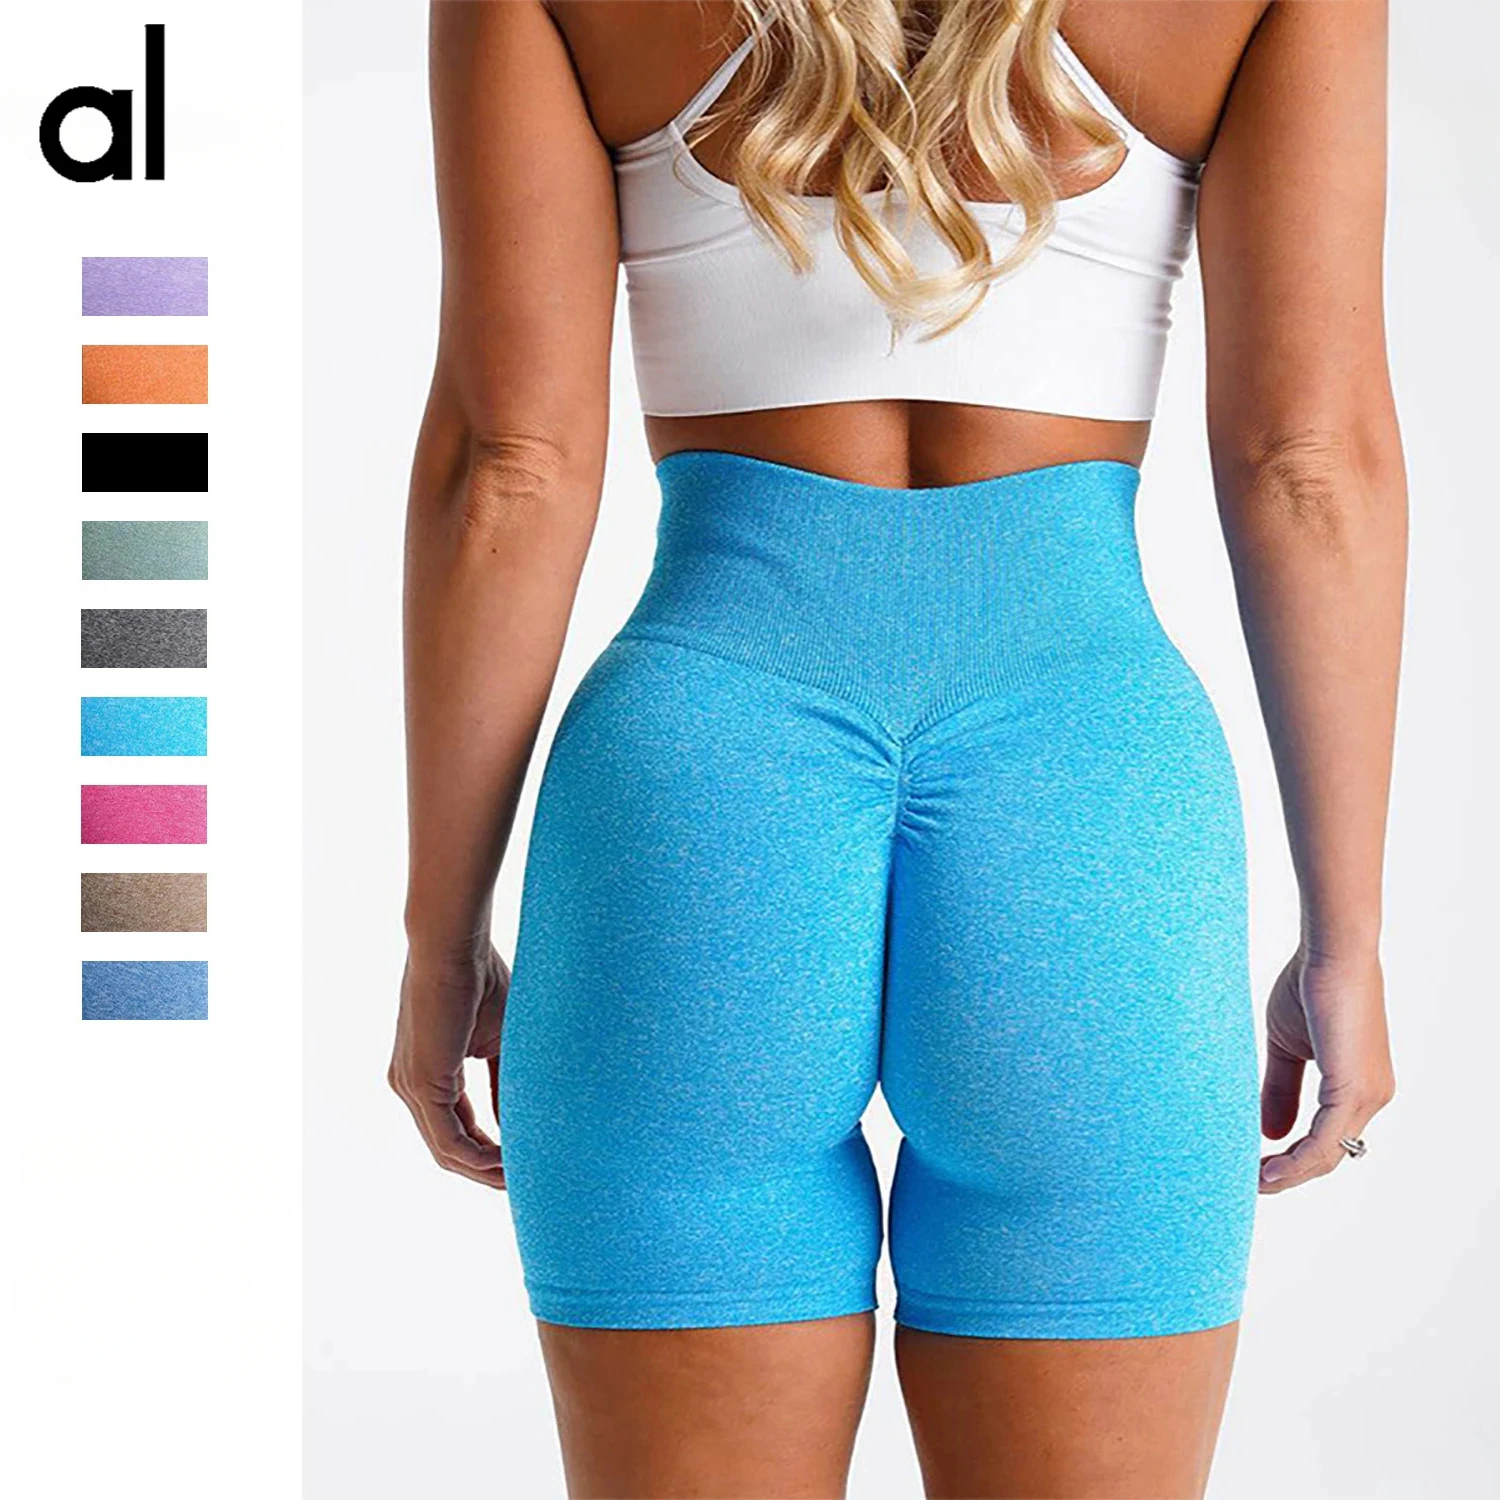 

AL Yoga New Peach To Lift The Buttocks Sports Leisure Fitness Shorts Women Highlight The Figure Hip Shorts